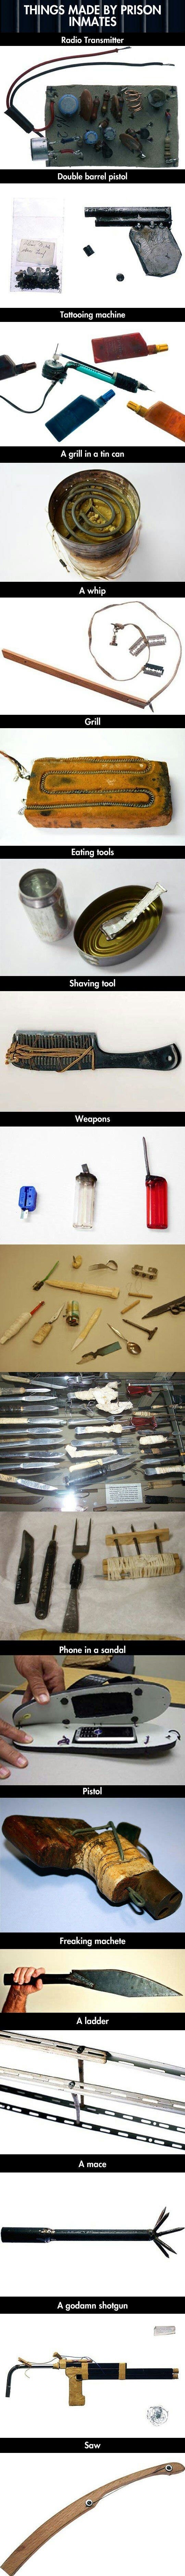 Things made by prison inmates